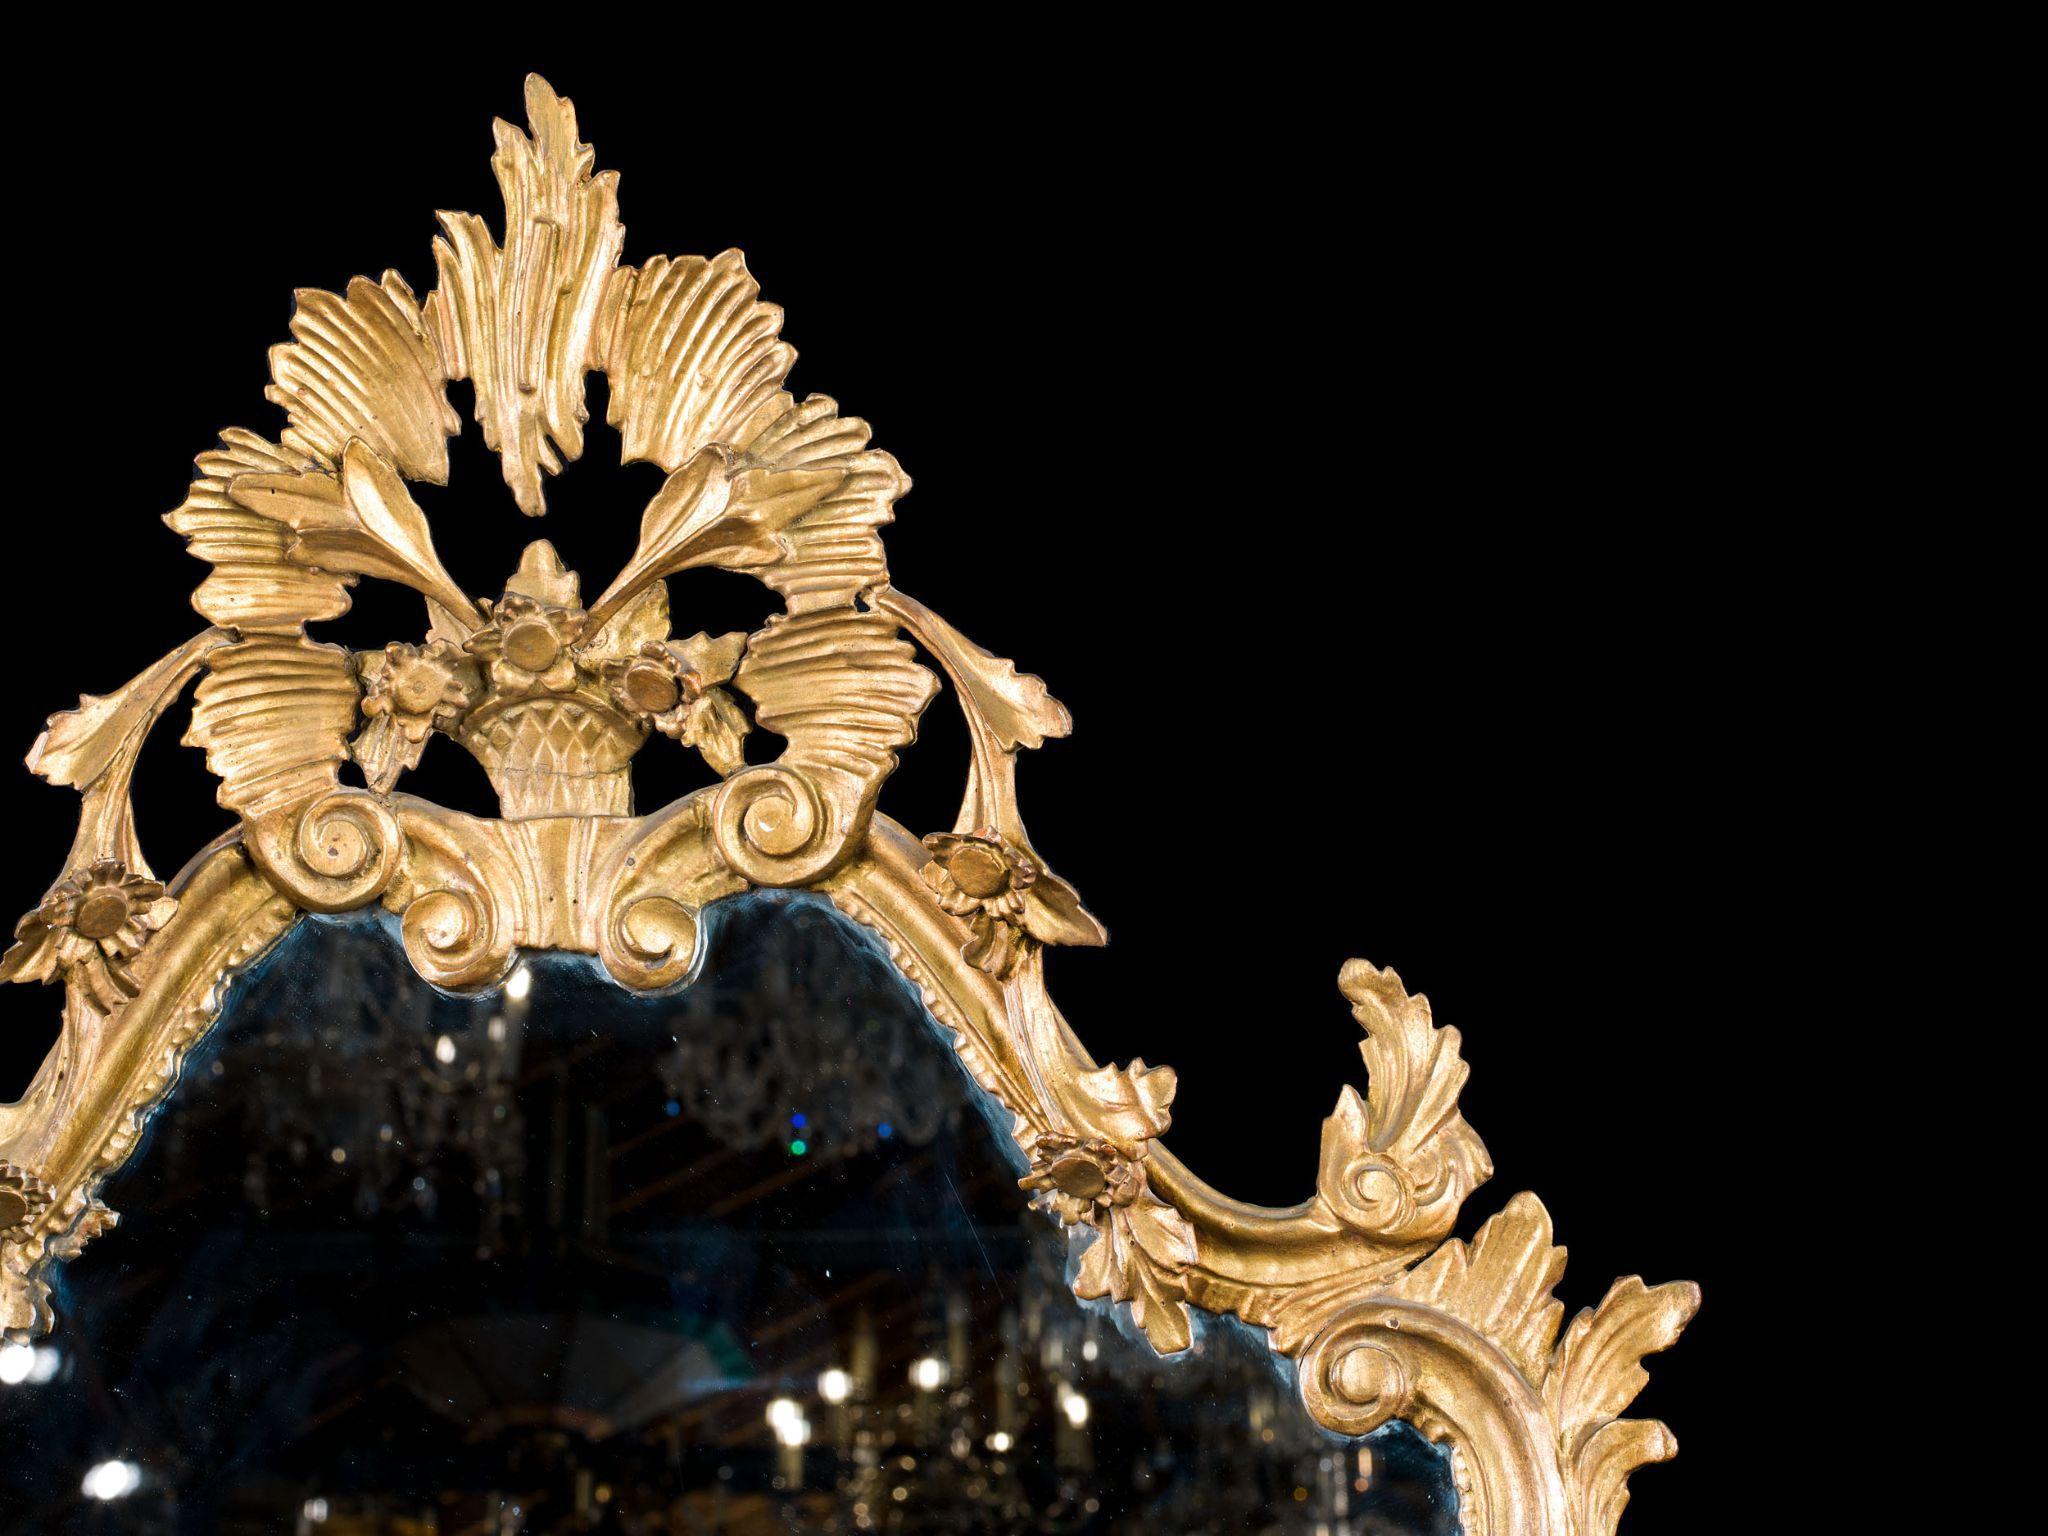 How to Care For Your Antique Mirrors - Bespoke Mirrors, Art Deco Mirrors